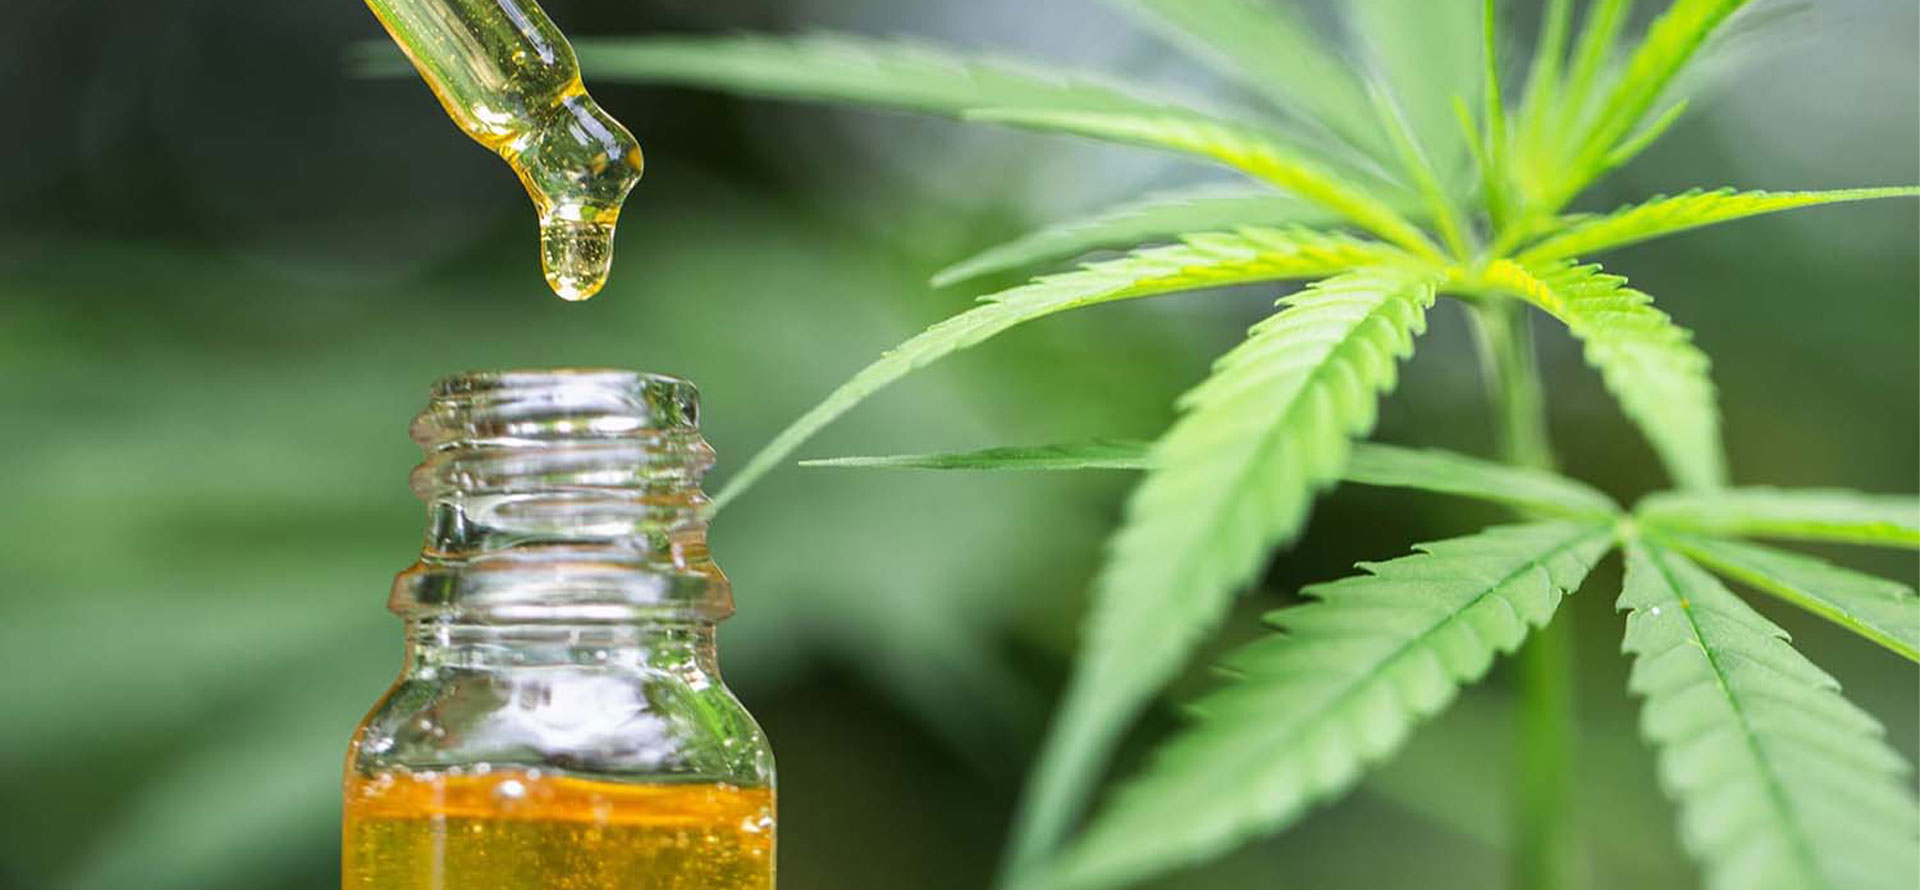 CAN IOWA SCHOOLS DISPENSE MEDICAL CBC OIL - Cbd|Oil|Benefits|Cbc|Effects|Pain|Study|Health|Thc|Products|Cannabinoids|Studies|Research|Anxiety|Cannabis|Symptoms|Evidence|People|System|Disease|Treatment|Inflammation|Hemp|Body|Receptors|Disorders|Brain|Plant|Cells|Side|Effect|Blood|Patients|Cancer|Product|Skin|Marijuana|Properties|Cannabidiol|Cannabinoid|Cbd Oil|Cbd Products|Cbc Oil|Side Effects|Endocannabinoid System|Chronic Pain|Multiple Sclerosis|Pain Relief|Cannabis Plant|Cbd Oil Benefits|Blood Pressure|Health Benefits|High Blood Pressure|Anti-Inflammatory Properties|Neuropathic Pain|Animal Studies|Hemp Plant|Hemp Oil|Anxiety Disorders|Cbd Product|Immune System|Clinical Trials|Cbd Gummies|Nerve Cells|Nervous System|Entourage Effect|Hemp Seed Oil|United States|Cbd Oils|Drug Administration